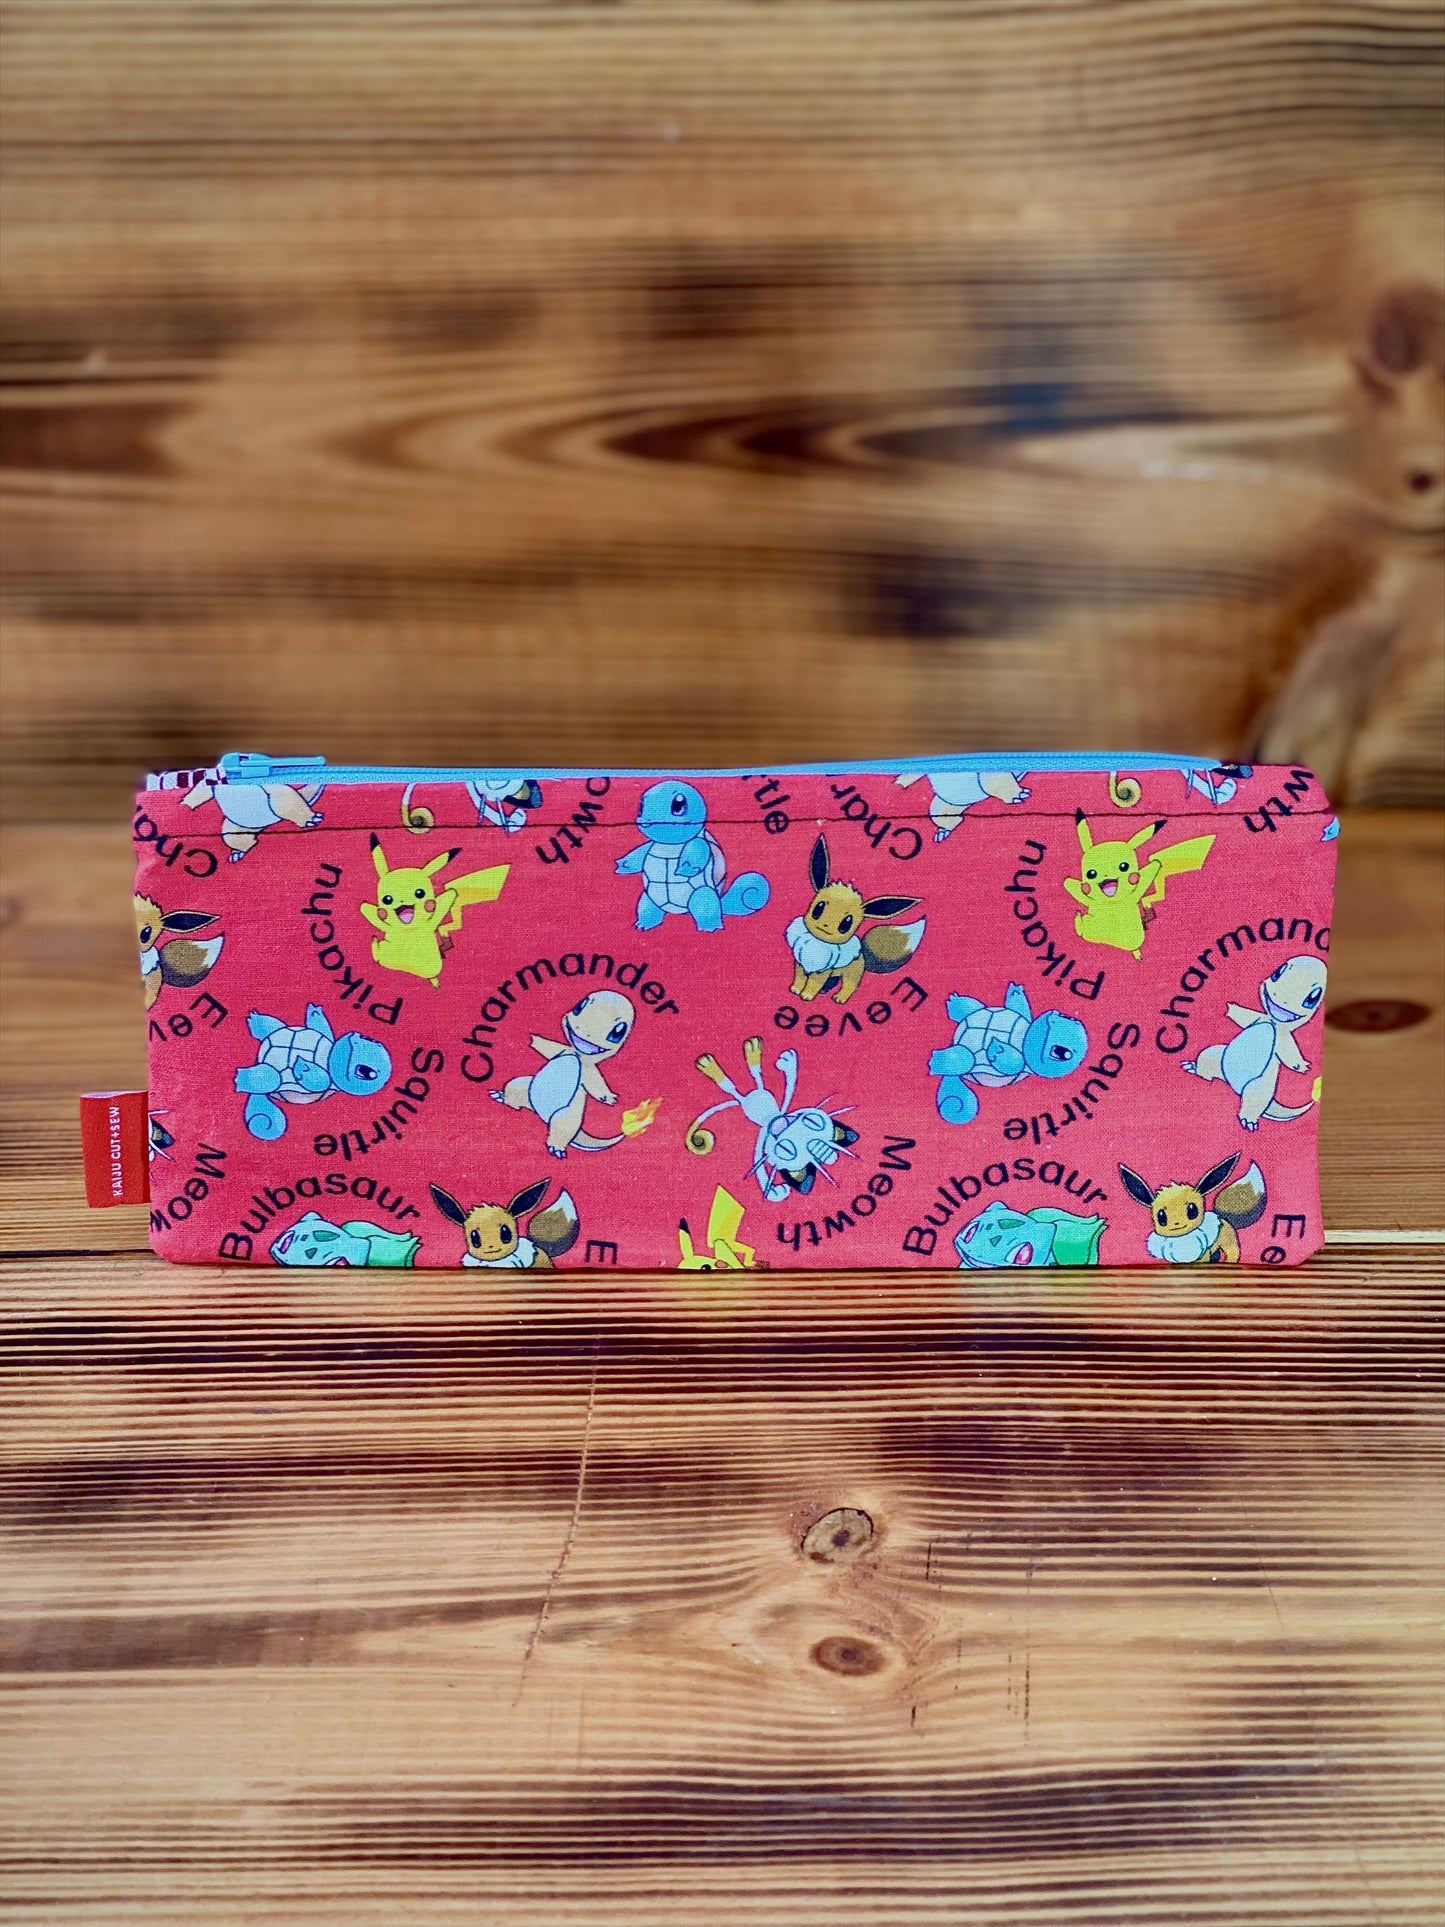 Kaiju Cut and Sew Red Pokemon Pencil Pouch | Handmade in Austin, Texas